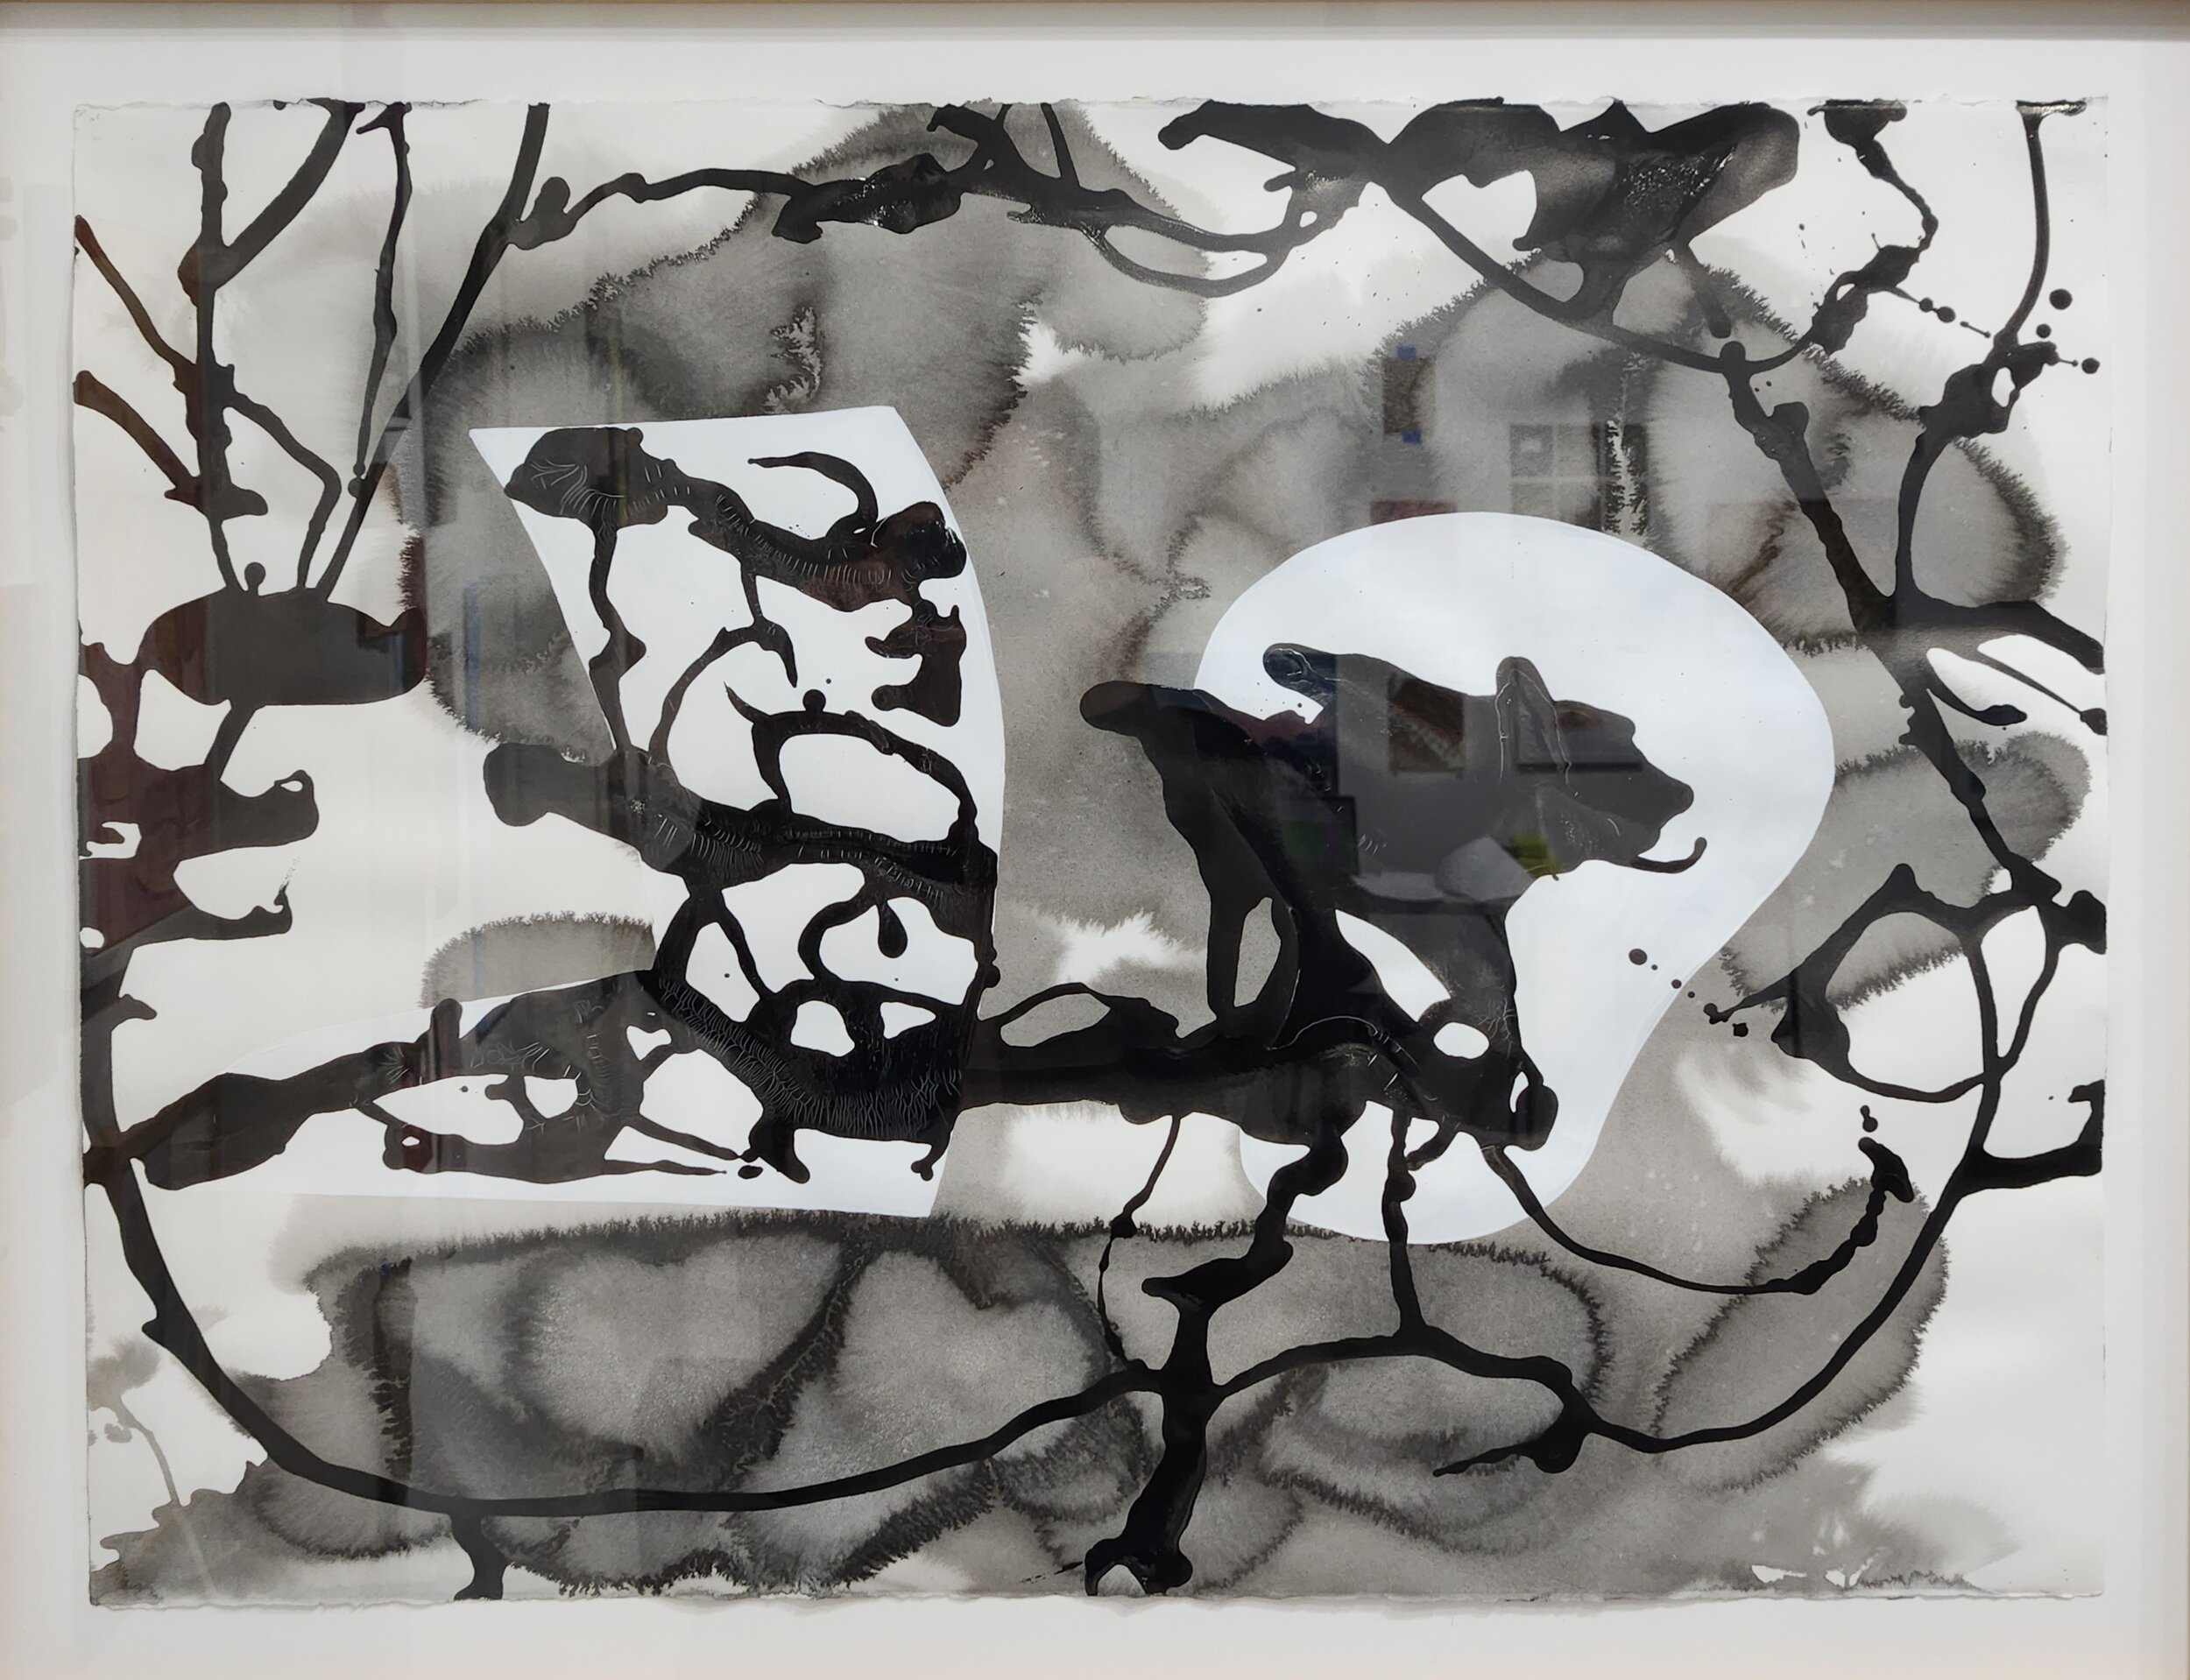   Dona Nelson ,  No Title , 1998, acrylic and ink on paper, 30 x 22" 